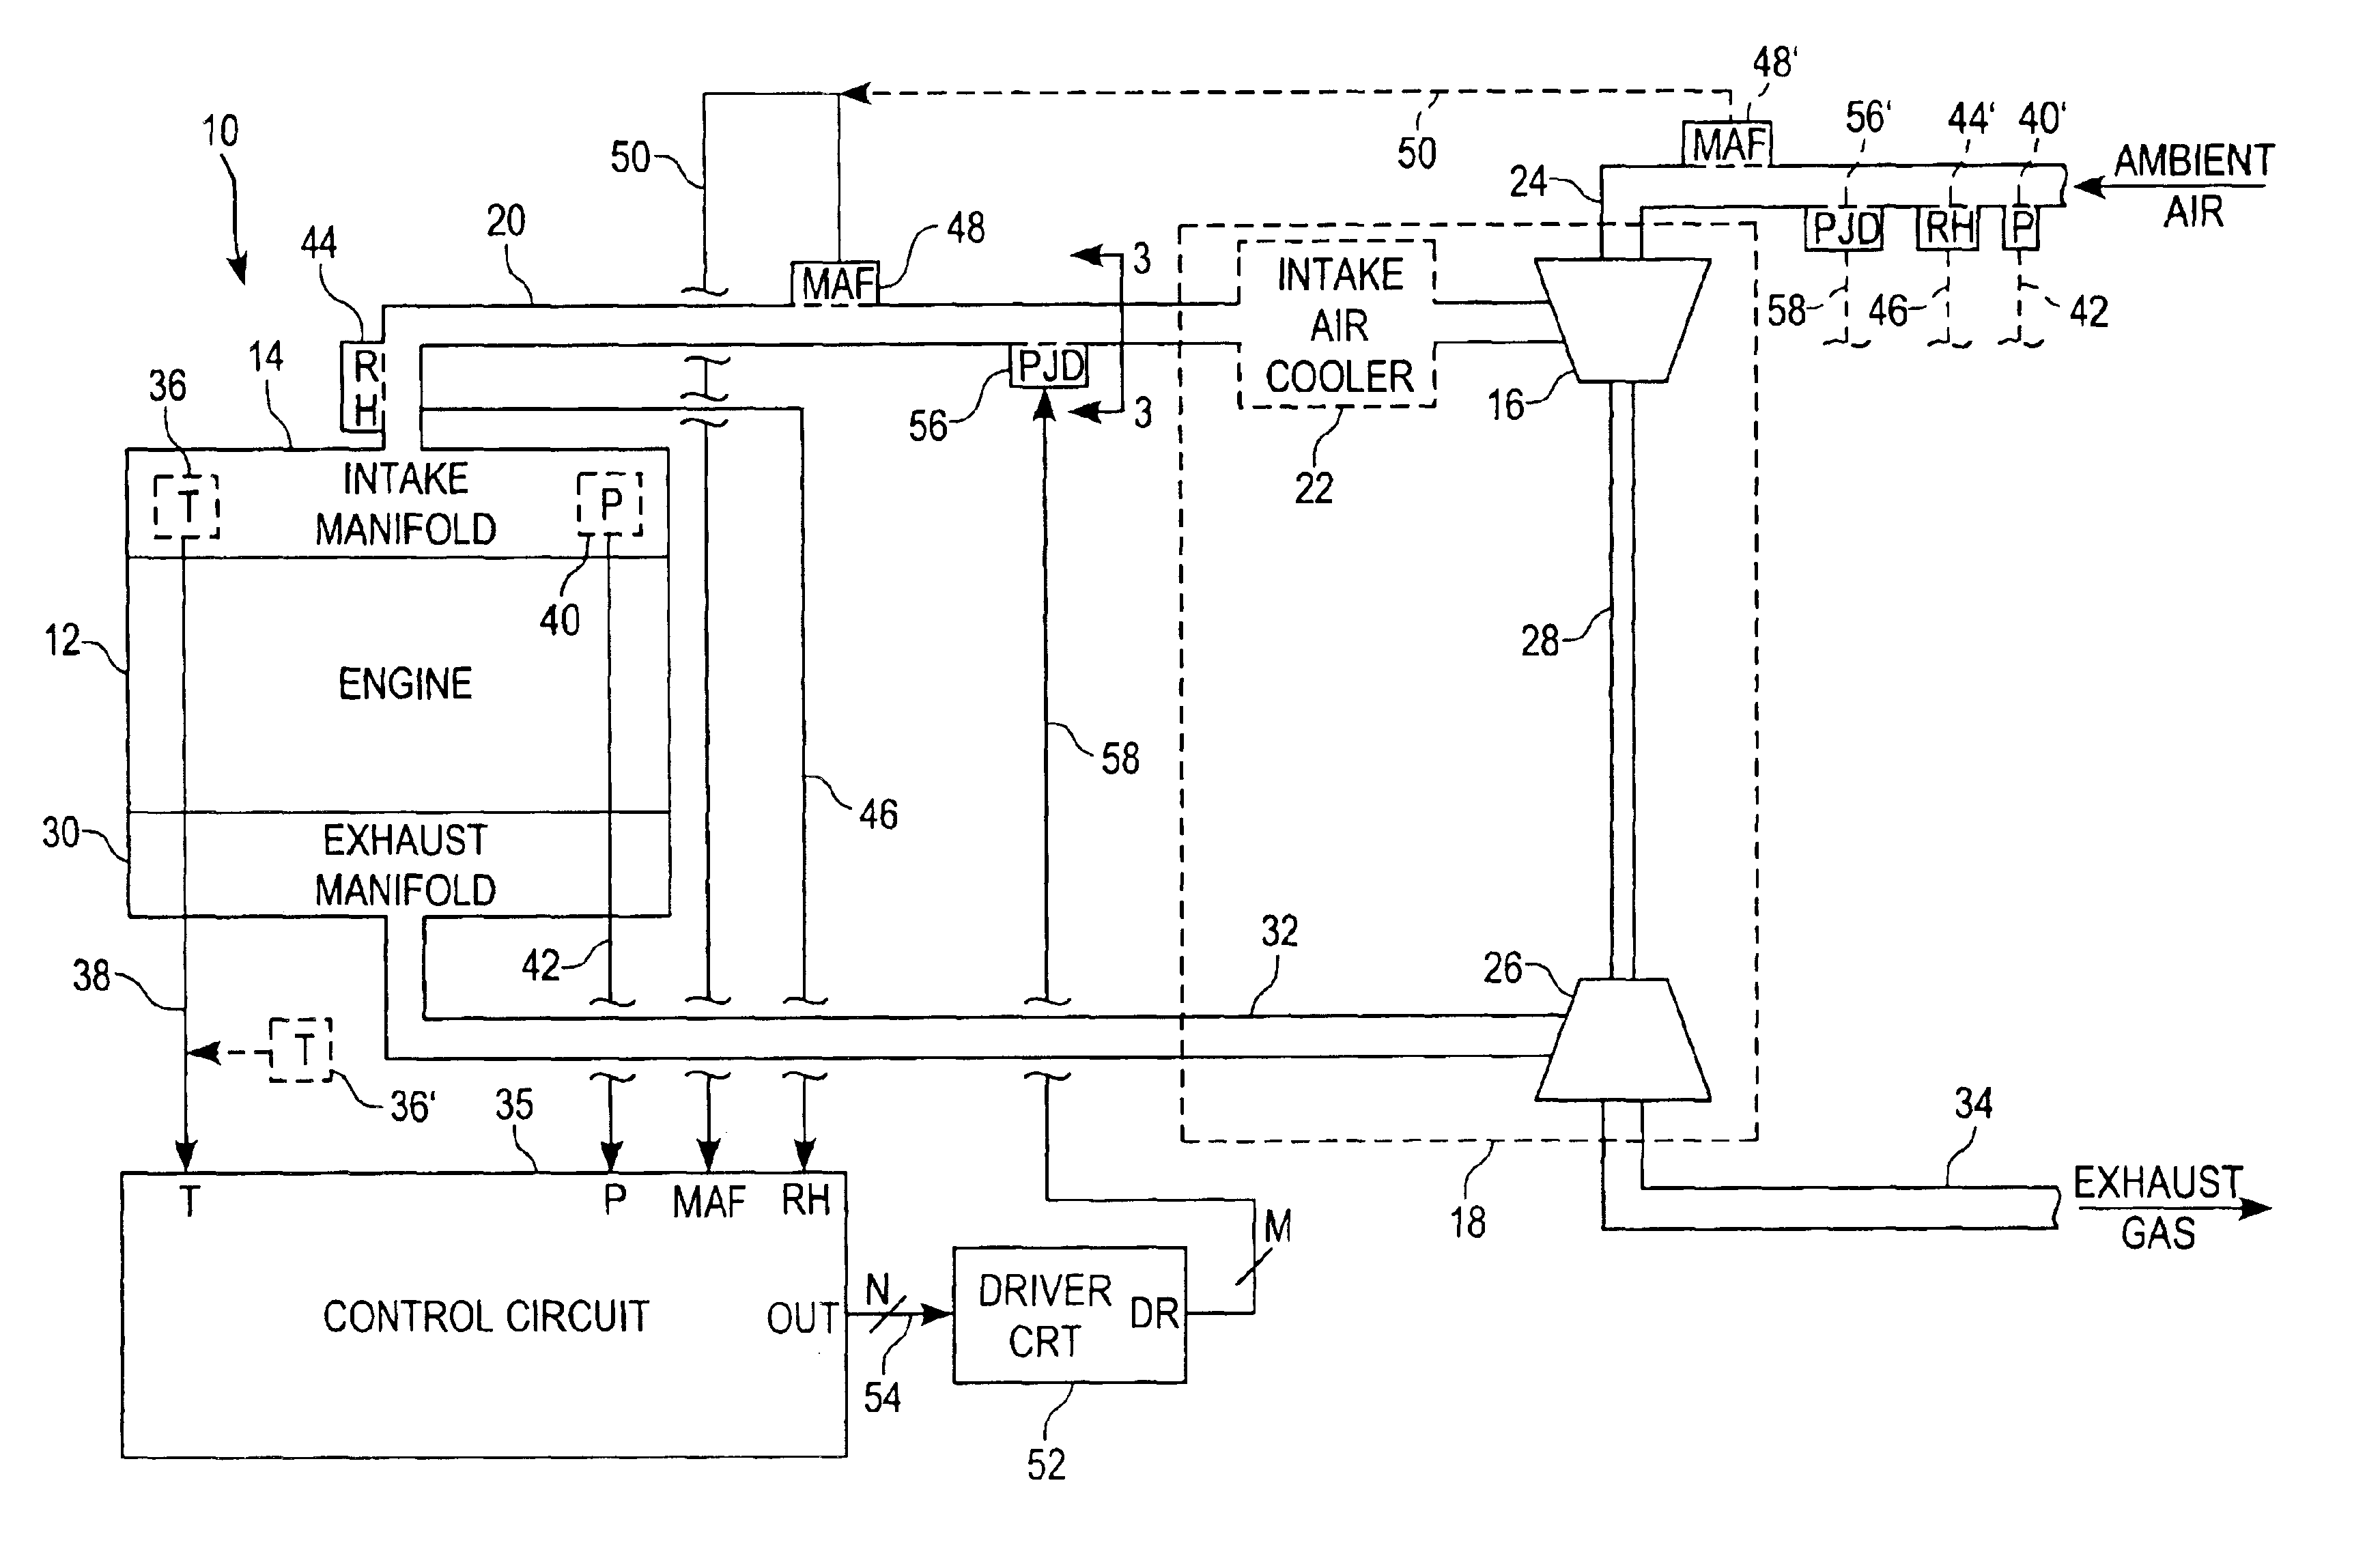 Intake air dehumidification system for an internal combustion engine